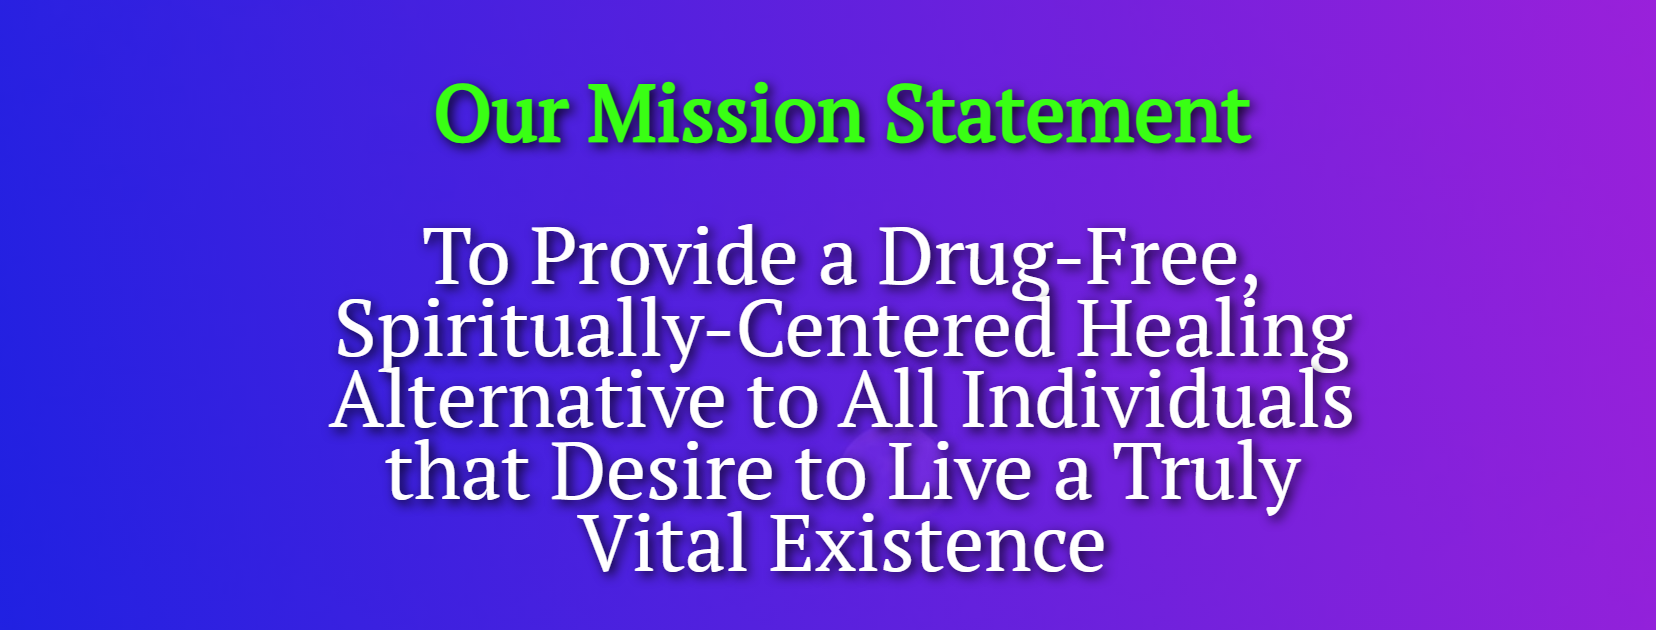 Our Mission Statement: To provide a drug-free sipirtually-centered healing alternative to all individuals that desire to live a truly vital existence.